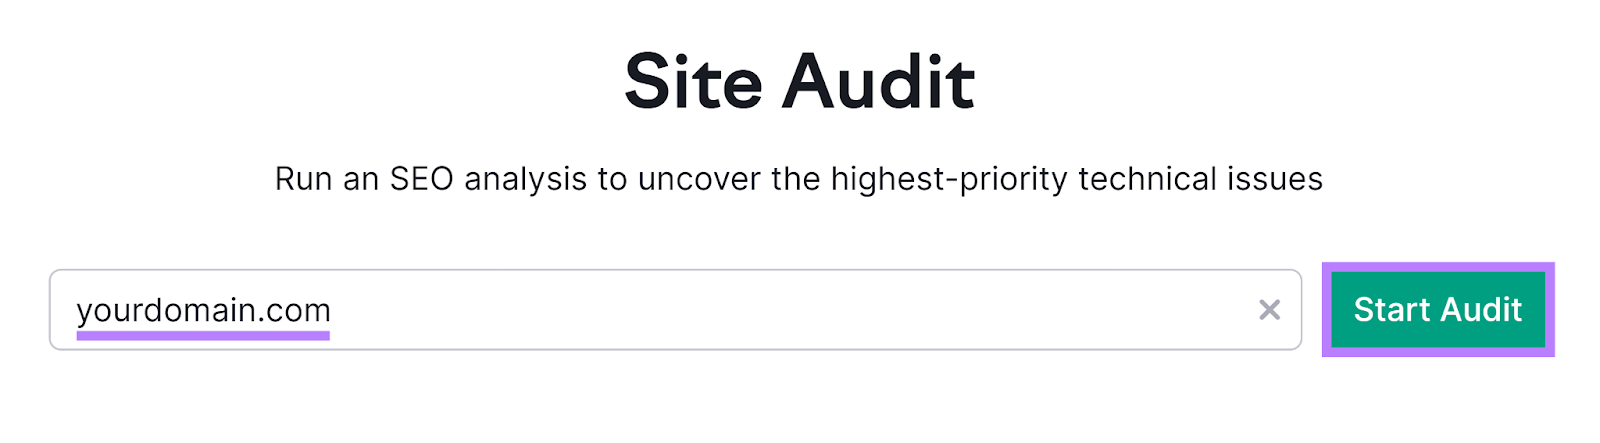 Site Audit start page with 'yourdomain.com' entered and Start Audit button highlighted.